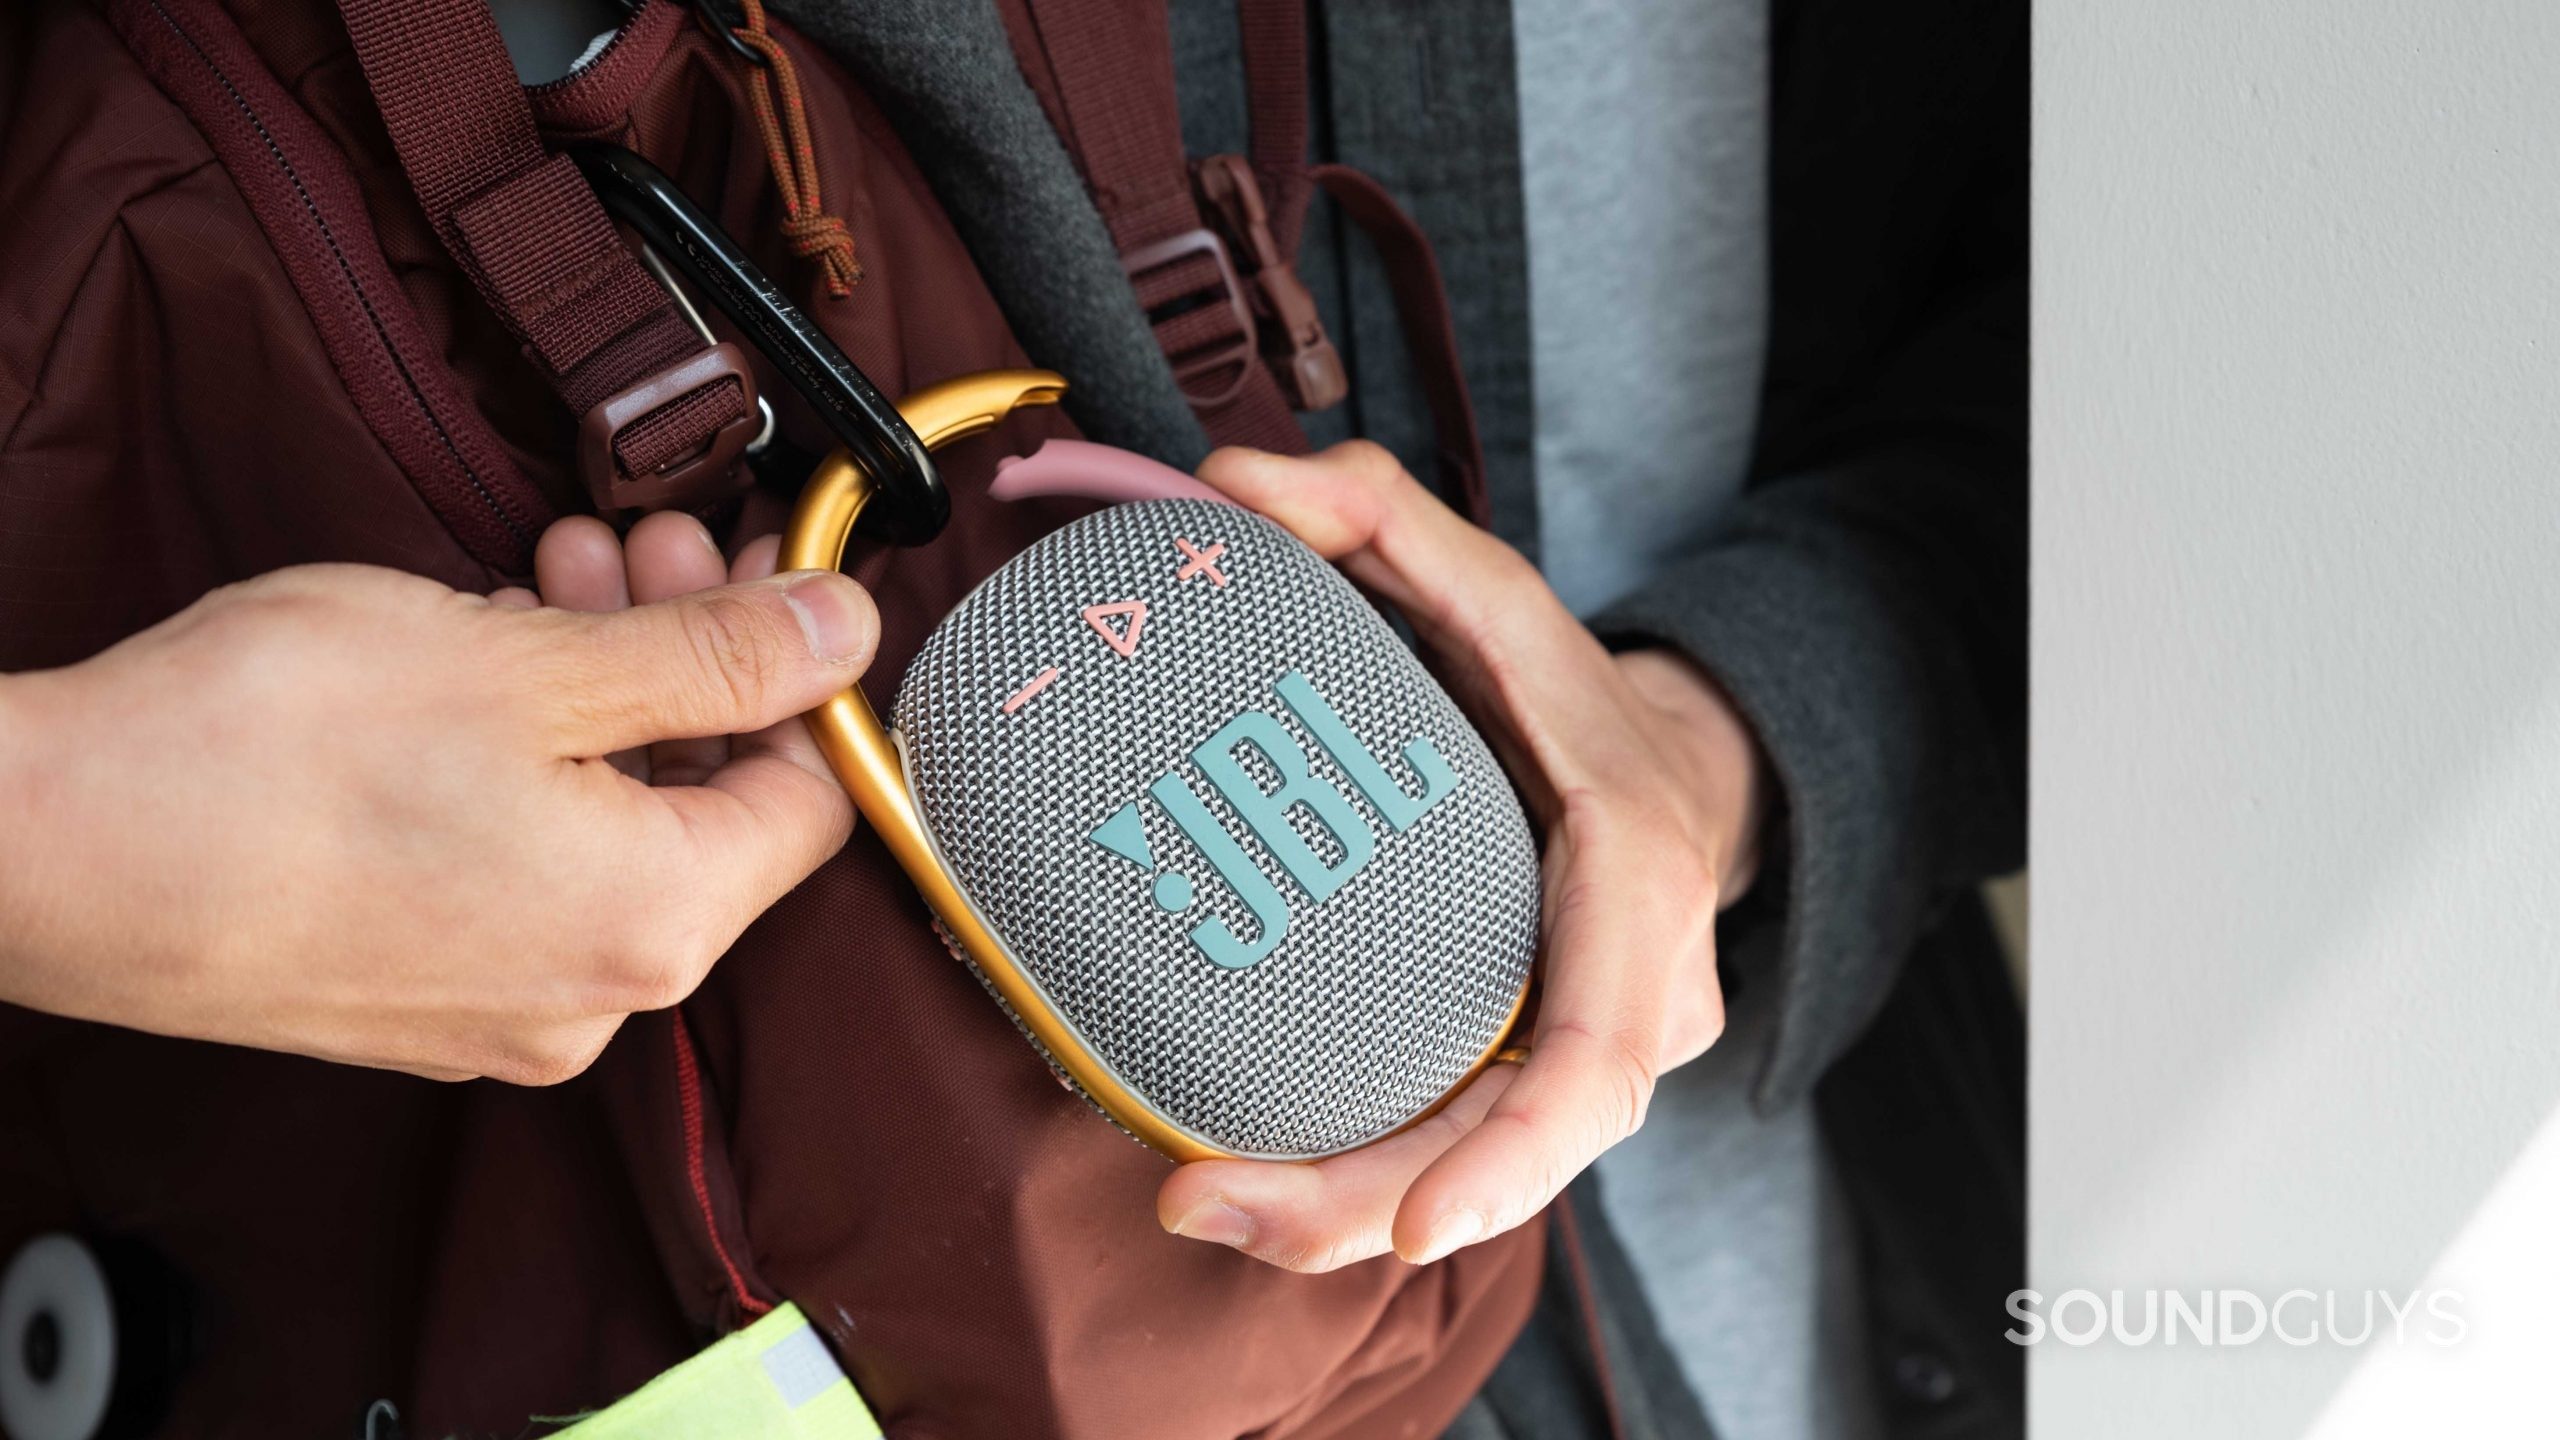 JBL Clip 4 review: Bring your music anywhere - SoundGuys